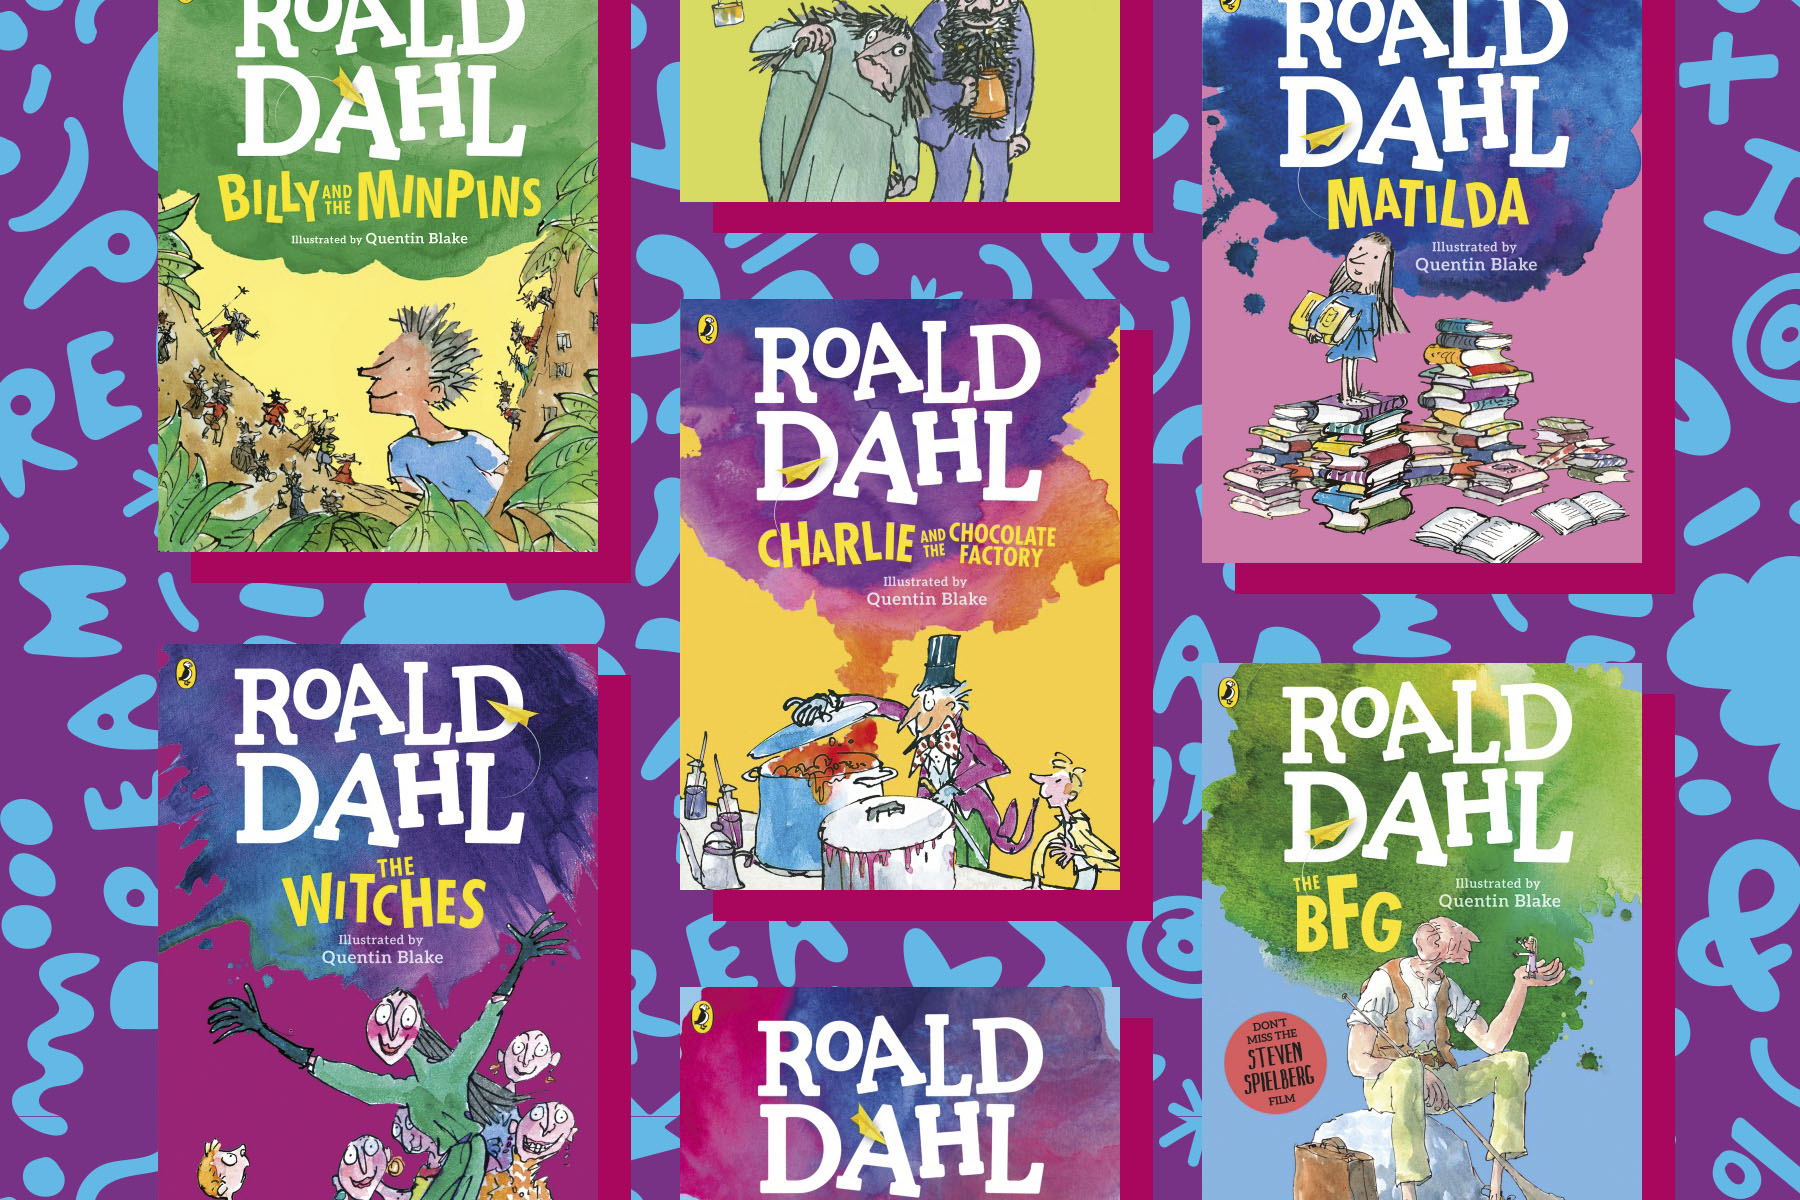 A picture of several of Roald Dahl's books on a purple background with light blue shapes and letters